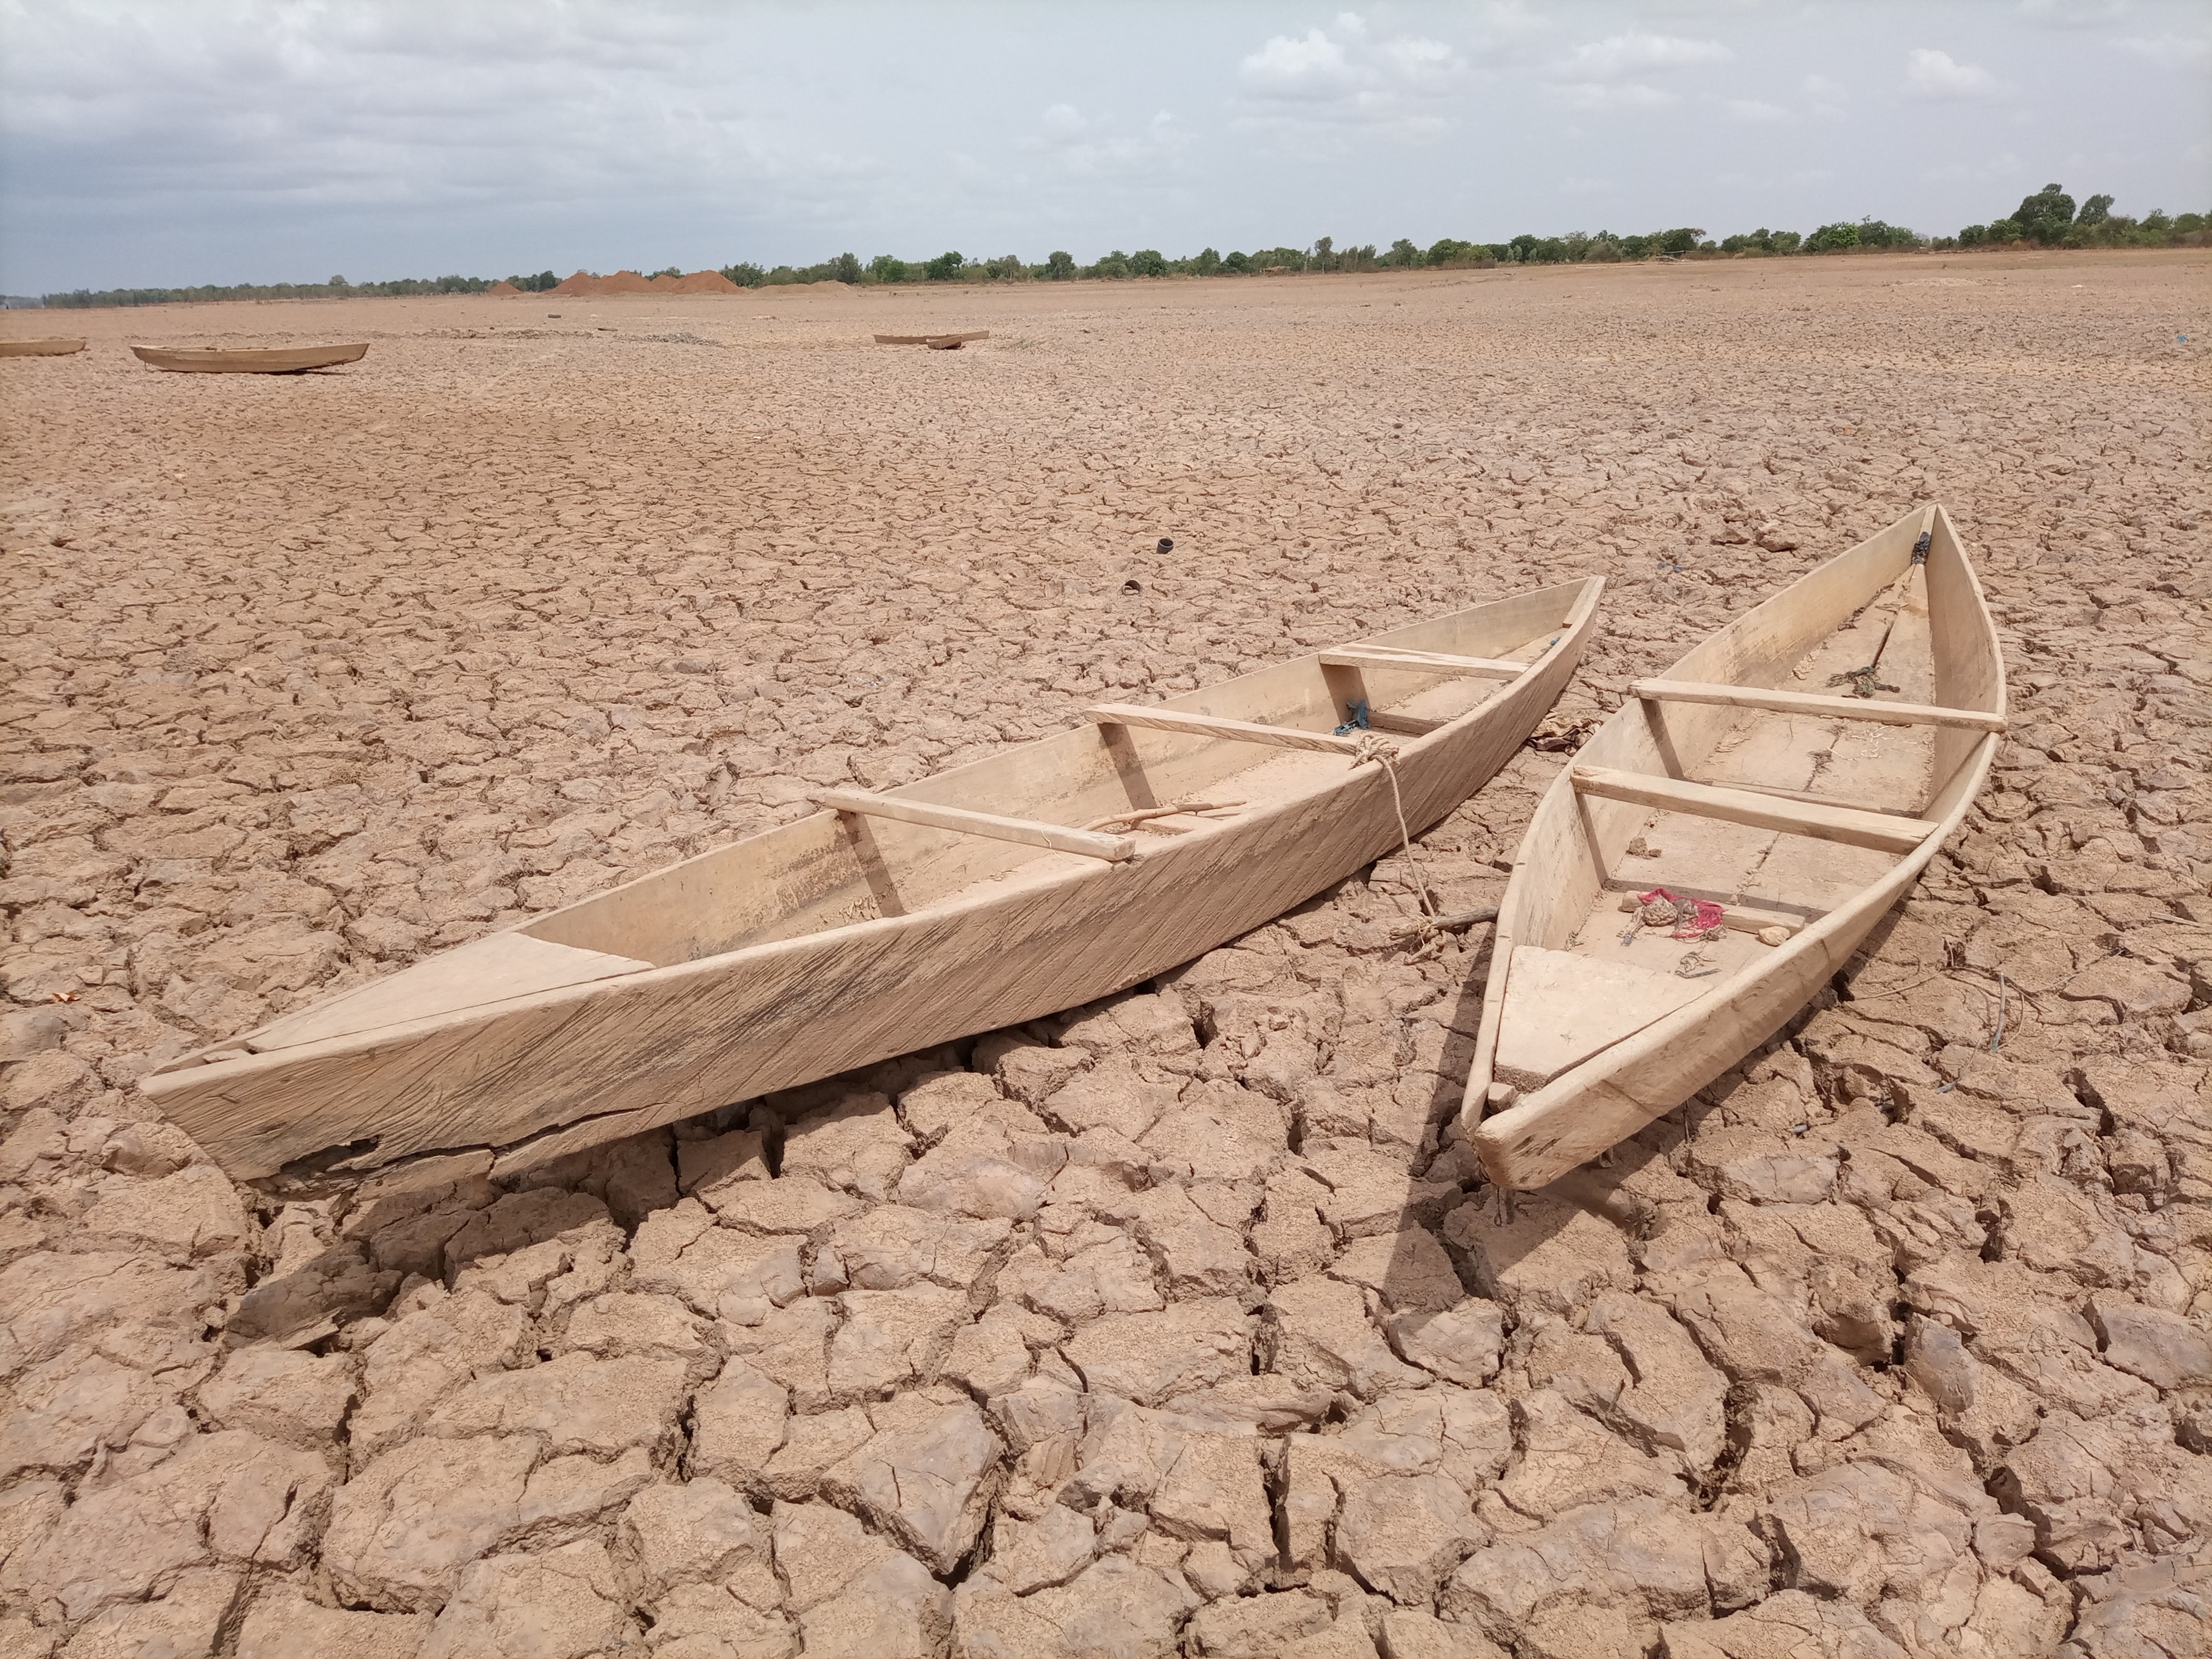 Image shows two wooden boats on an open landscape which is very dry and cracked 